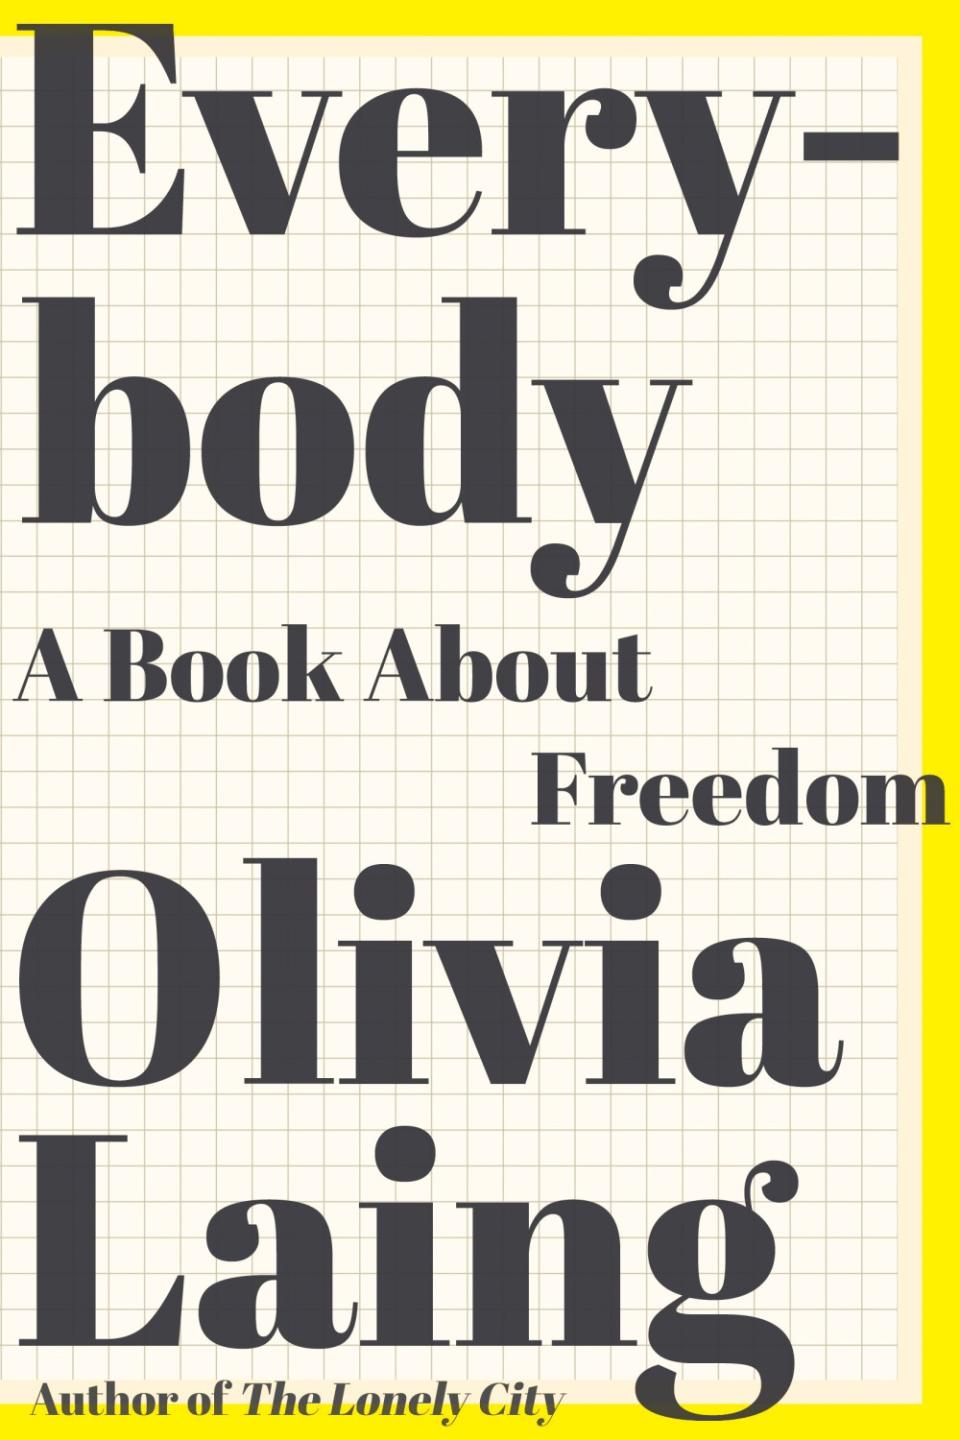 "Everybody: A Book About Freedom," by Olivia Laing